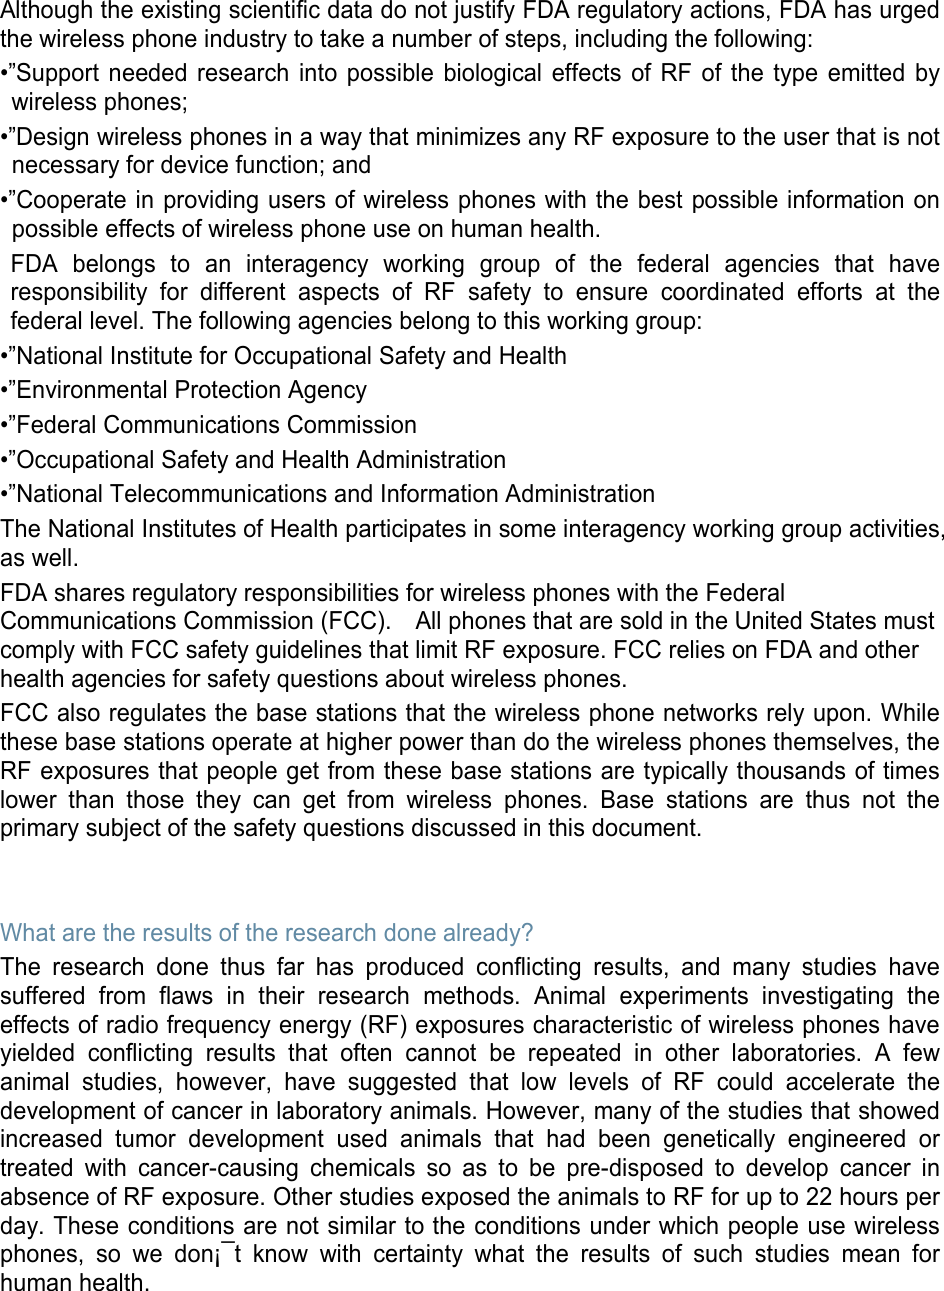 Although the existing scientific data do not justify FDA regulatory actions, FDA has urged the wireless phone industry to take a number of steps, including the following: •”Support needed research into possible biological effects of RF of the type emitted by wireless phones; •”Design wireless phones in a way that minimizes any RF exposure to the user that is not necessary for device function; and •”Cooperate in providing users of wireless phones with the best possible information on possible effects of wireless phone use on human health. FDA belongs to an interagency working group of the federal agencies that have responsibility for different aspects of RF safety to ensure coordinated efforts at the federal level. The following agencies belong to this working group: •”National Institute for Occupational Safety and Health •”Environmental Protection Agency •”Federal Communications Commission •”Occupational Safety and Health Administration •”National Telecommunications and Information Administration The National Institutes of Health participates in some interagency working group activities, as well. FDA shares regulatory responsibilities for wireless phones with the Federal Communications Commission (FCC).    All phones that are sold in the United States must comply with FCC safety guidelines that limit RF exposure. FCC relies on FDA and other health agencies for safety questions about wireless phones. FCC also regulates the base stations that the wireless phone networks rely upon. While these base stations operate at higher power than do the wireless phones themselves, the RF exposures that people get from these base stations are typically thousands of times lower than those they can get from wireless phones. Base stations are thus not the primary subject of the safety questions discussed in this document.   What are the results of the research done already? The research done thus far has produced conflicting results, and many studies have suffered from flaws in their research methods. Animal experiments investigating the effects of radio frequency energy (RF) exposures characteristic of wireless phones have yielded conflicting results that often cannot be repeated in other laboratories. A few animal studies, however, have suggested that low levels of RF could accelerate the development of cancer in laboratory animals. However, many of the studies that showed increased tumor development used animals that had been genetically engineered or treated with cancer-causing chemicals so as to be pre-disposed to develop cancer in absence of RF exposure. Other studies exposed the animals to RF for up to 22 hours per day. These conditions are not similar to the conditions under which people use wireless phones, so we don¡¯t know with certainty what the results of such studies mean for human health.    